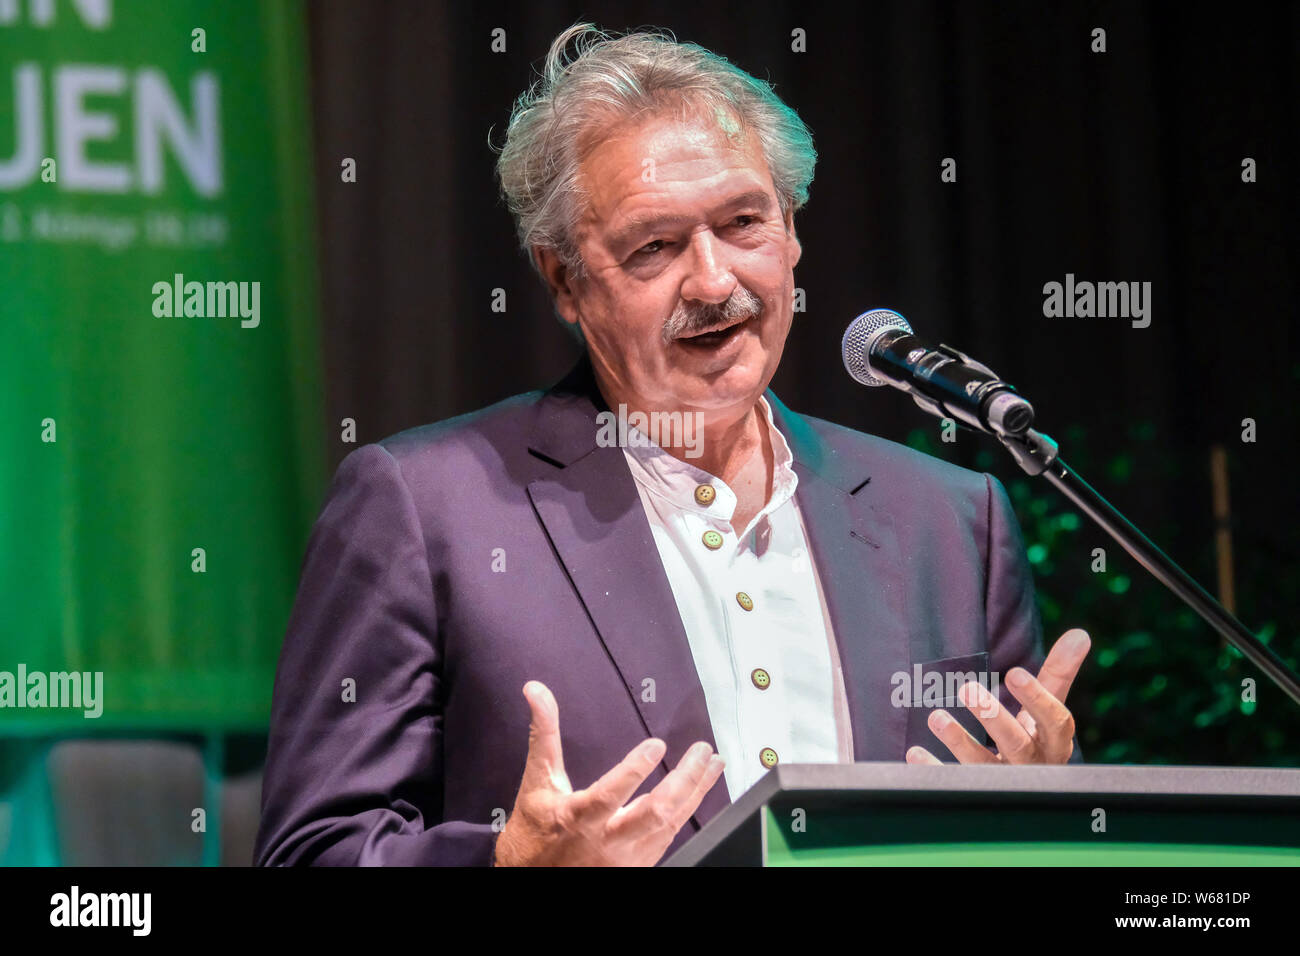 Dortmund / Germany, 22 June 2019. JEAN ASSELBORN, Luxembourg Foreign Minister, since 2014 also Minister for Immigration and Asylum. Speech at the Protestant Church Congress 2019 in Dortmund Stock Photo